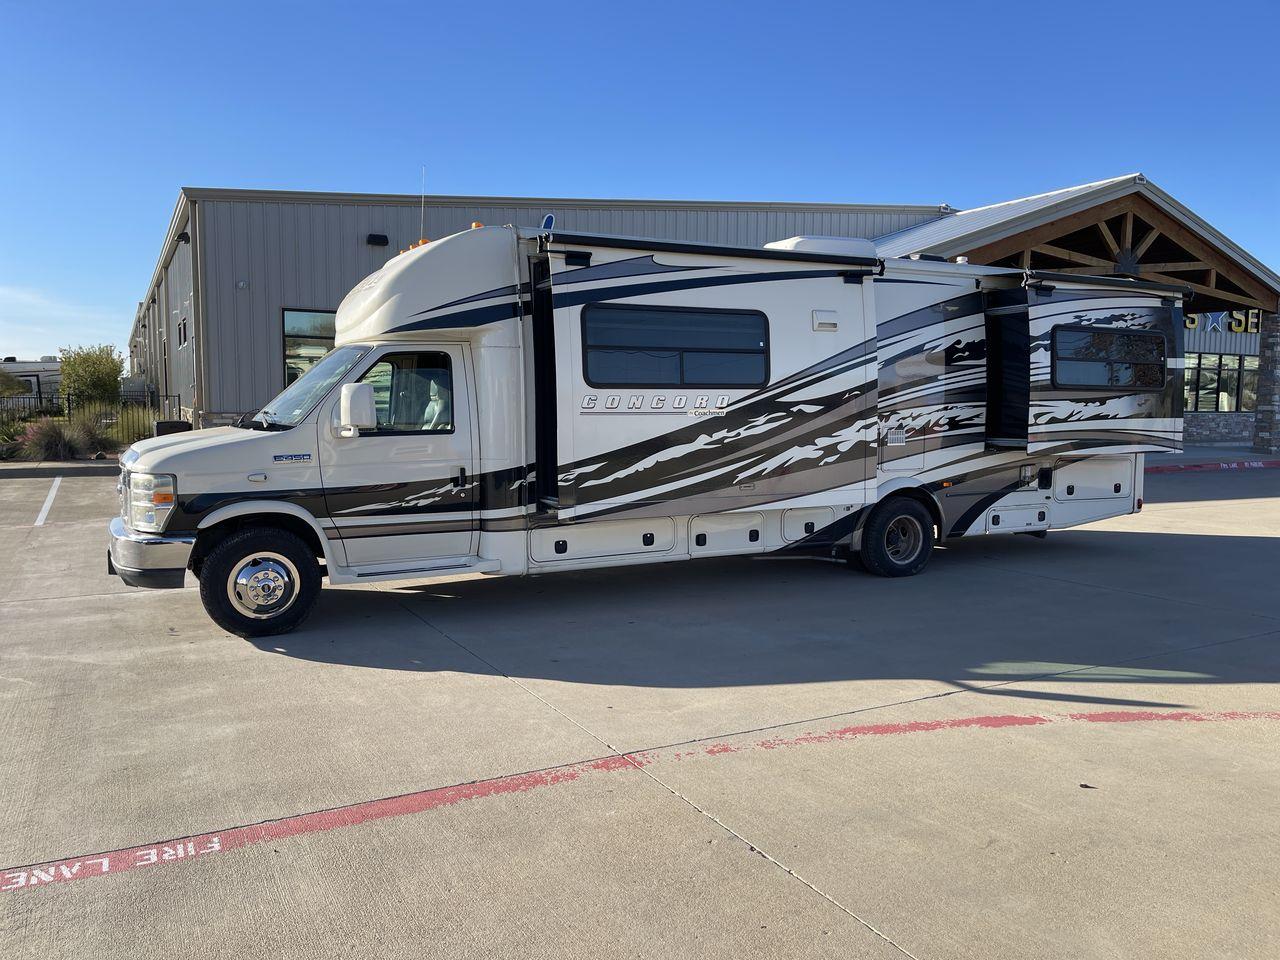 2011 WHITE COACHMEN CONCORD 300TS (1FDEX4FS9BD) , Length: 30.83 ft. | Dry Weight: 12,110 lbs. | Gross Weight: 14,500 lbs. | Slides: 3 transmission, located at 4319 N Main St, Cleburne, TX, 76033, (817) 678-5133, 32.385960, -97.391212 - The 2011 Coachmen Concord 300TS, a class C motorhome that redefines travel comfort and convenience. With a length of 31 feet, this well-maintained model is built on a Ford E450 chassis, powered by a dependable Triton V10 engine, ensuring a smooth and reliable journey. The Concord 300TS features thre - Photo #23